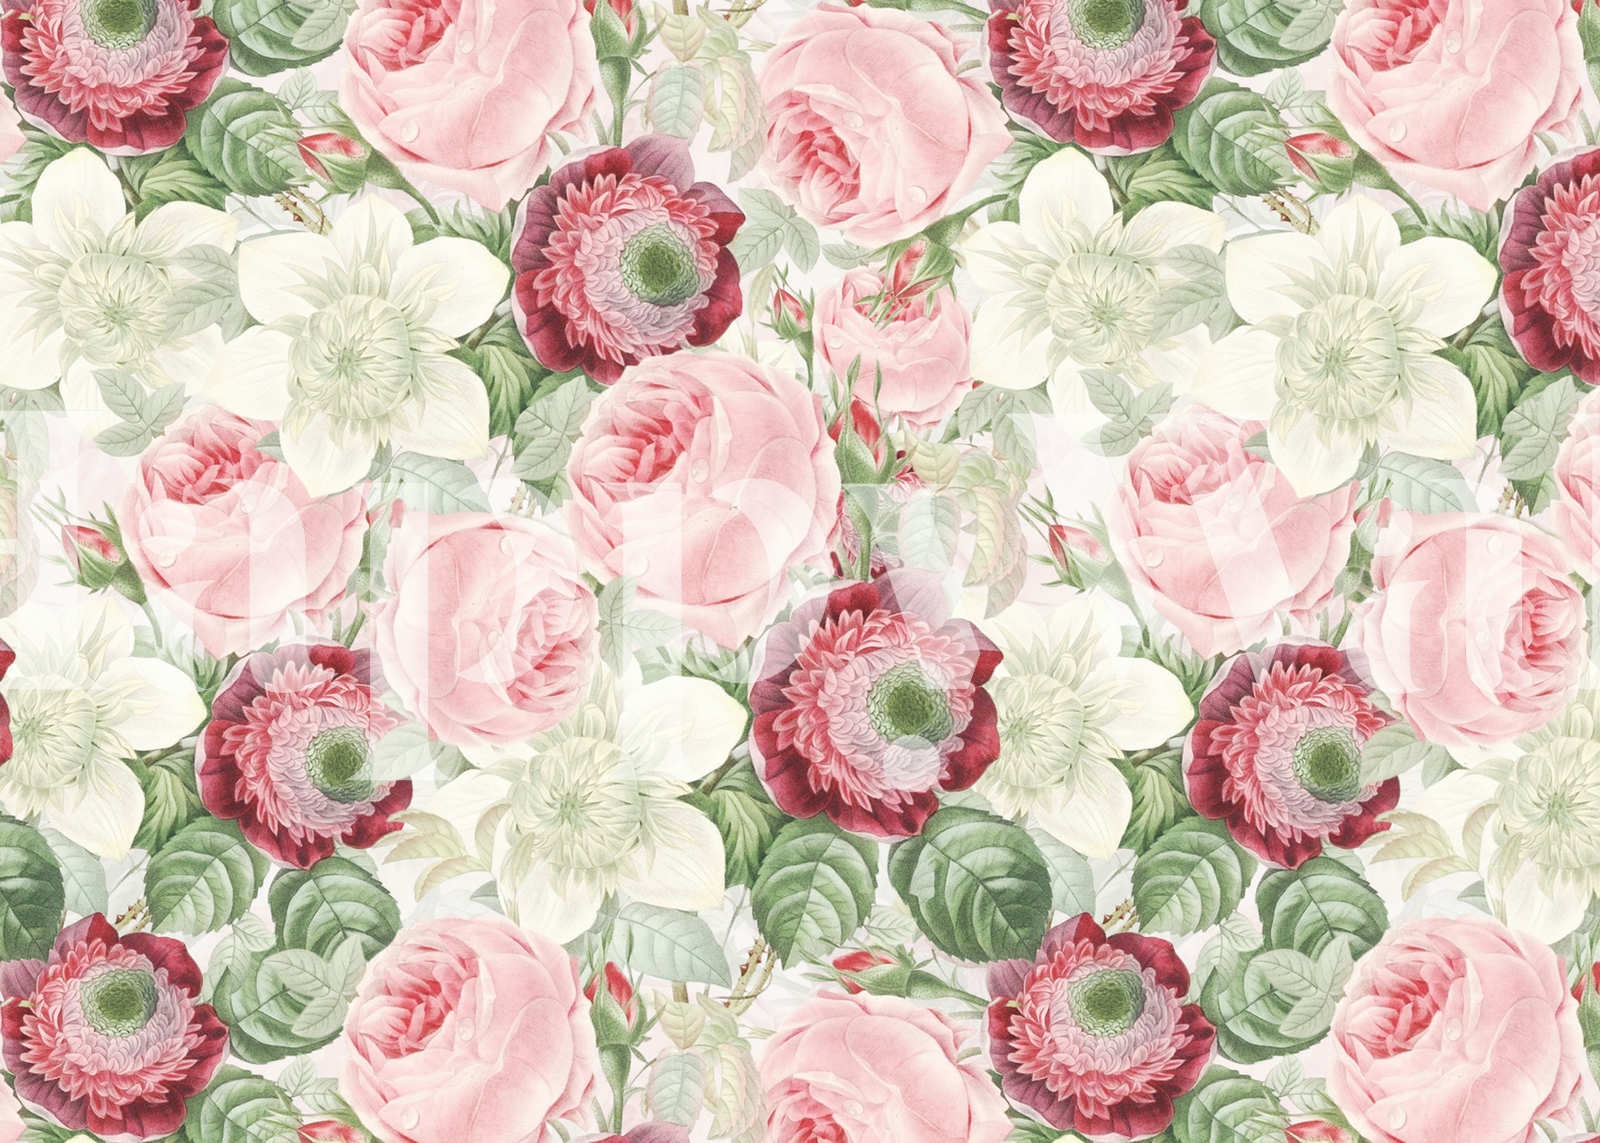 Vintage Roses and Anemones Wallpaper | Happywall